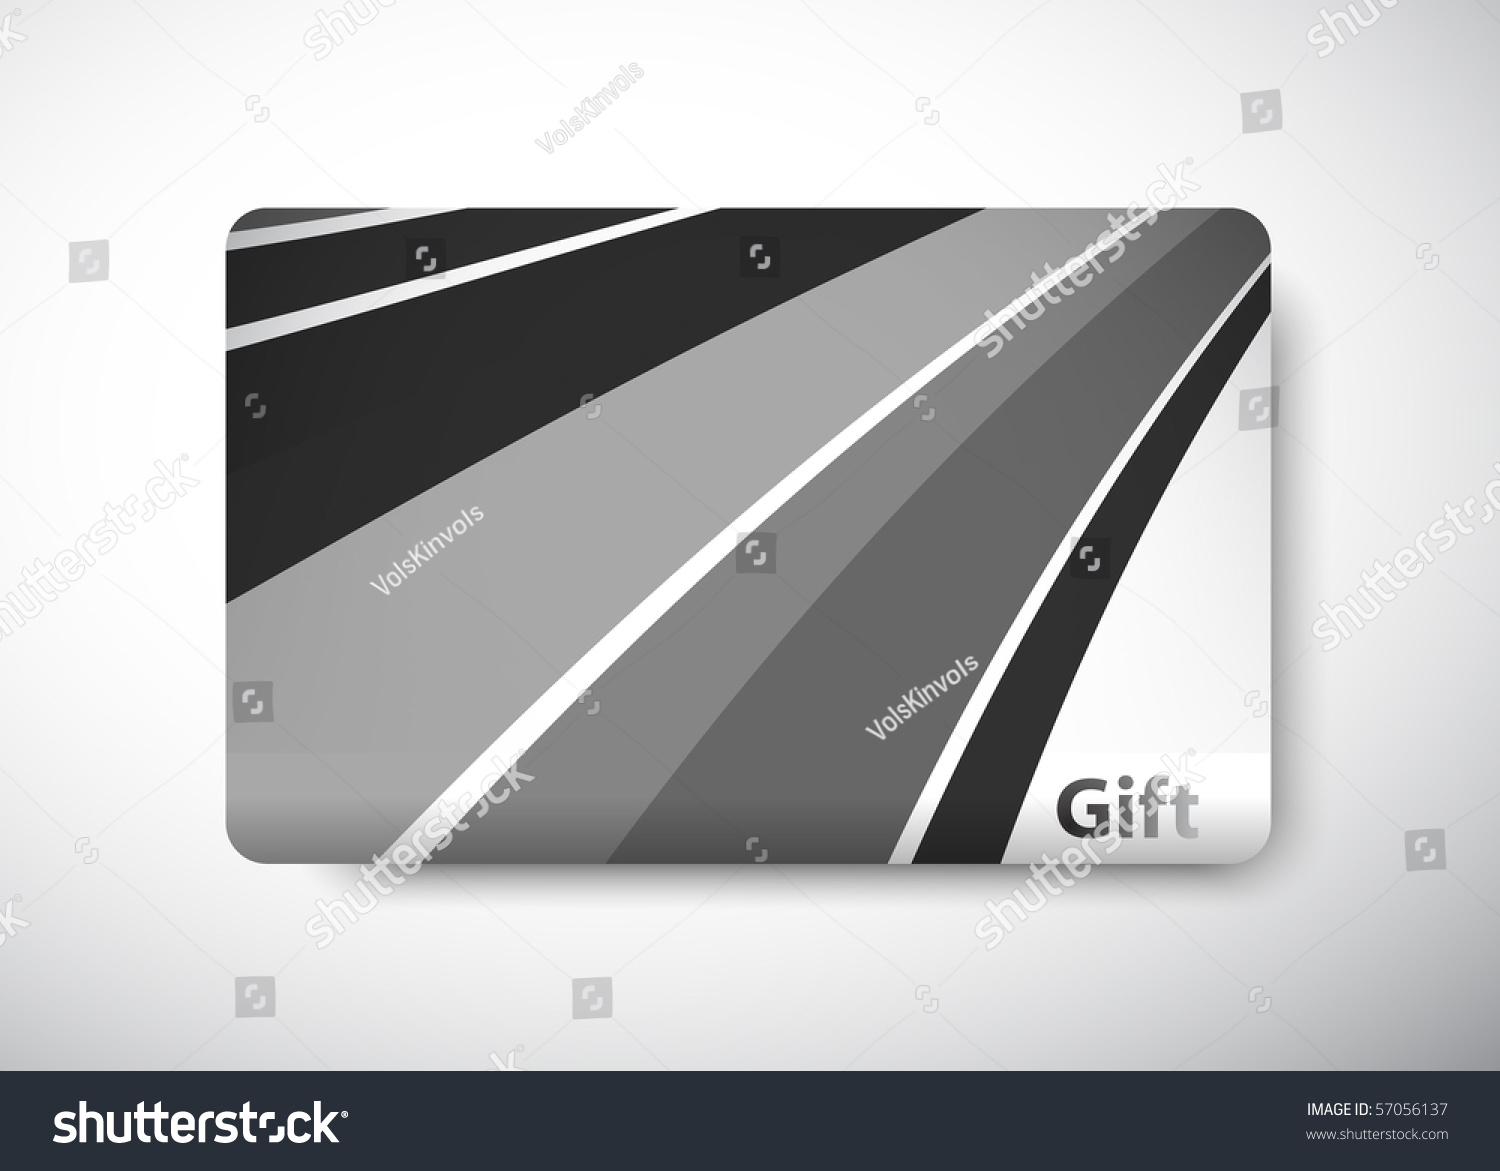 Gift Card Size 3 3/8" X 2 1/8" (86 X 54 Mm) Stock Vector